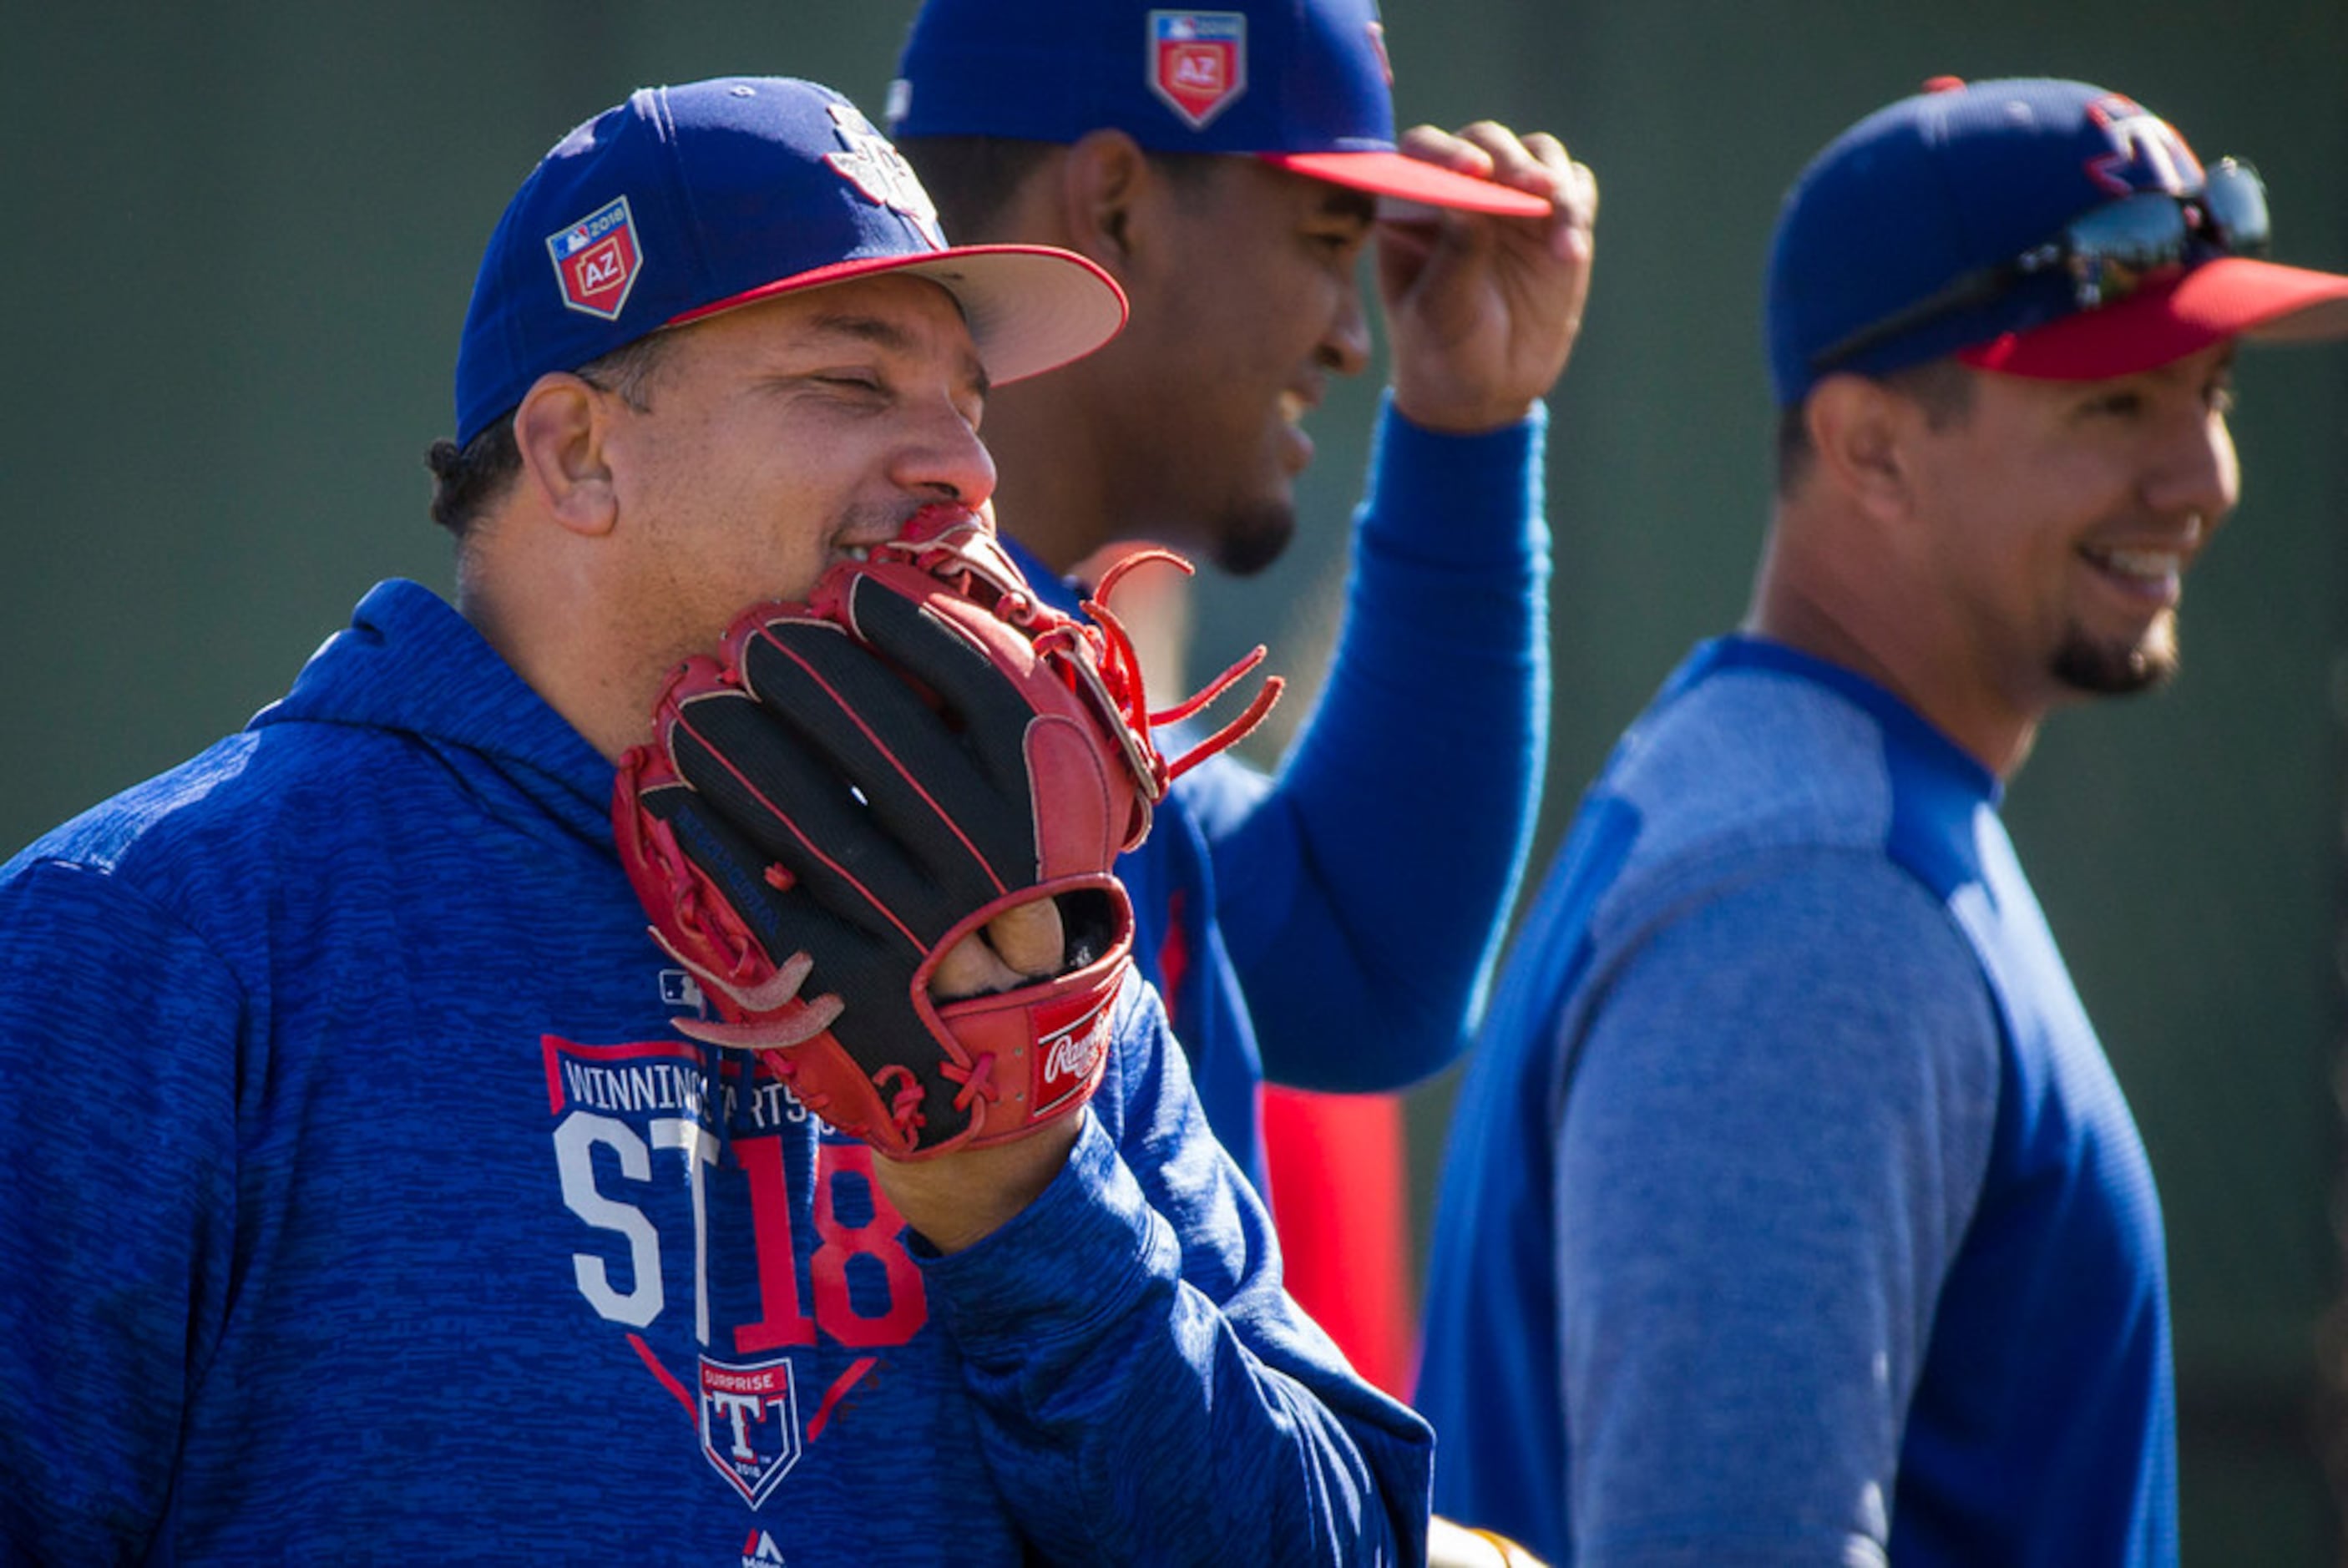 Rangers rotation updates: Bartolo Colon is back, Texas' Cole Hamels plan,  and more